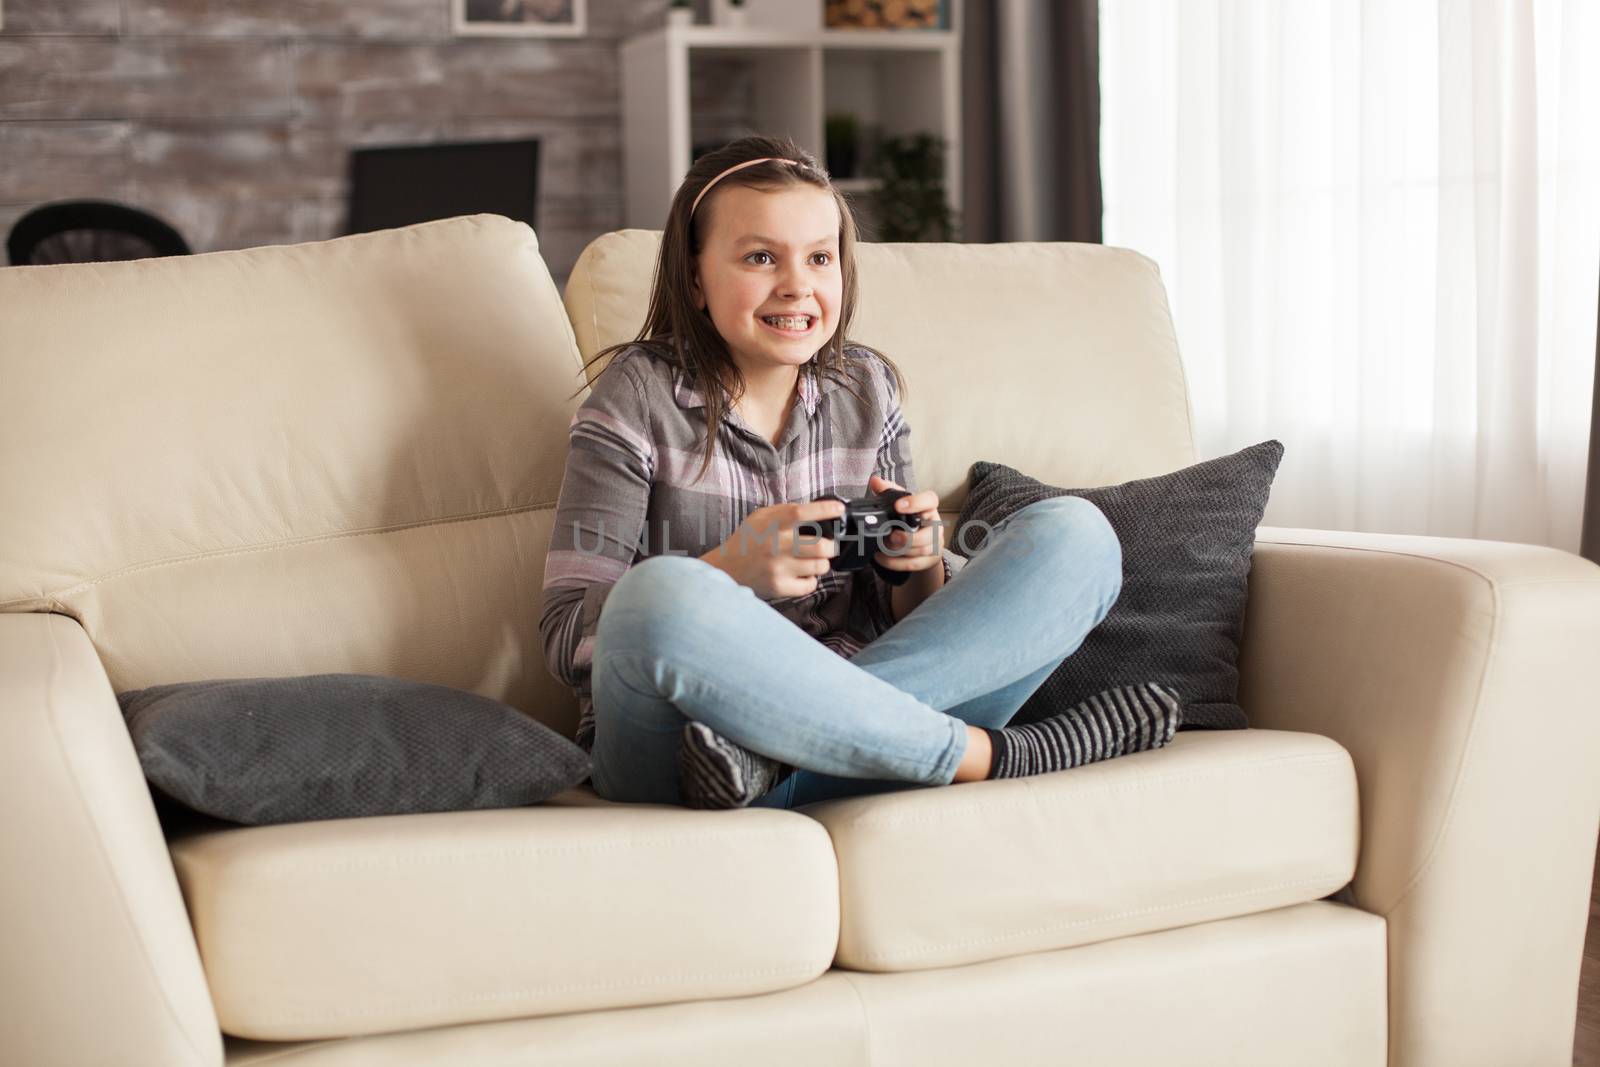 Focused little girl with braces playing video games by DCStudio